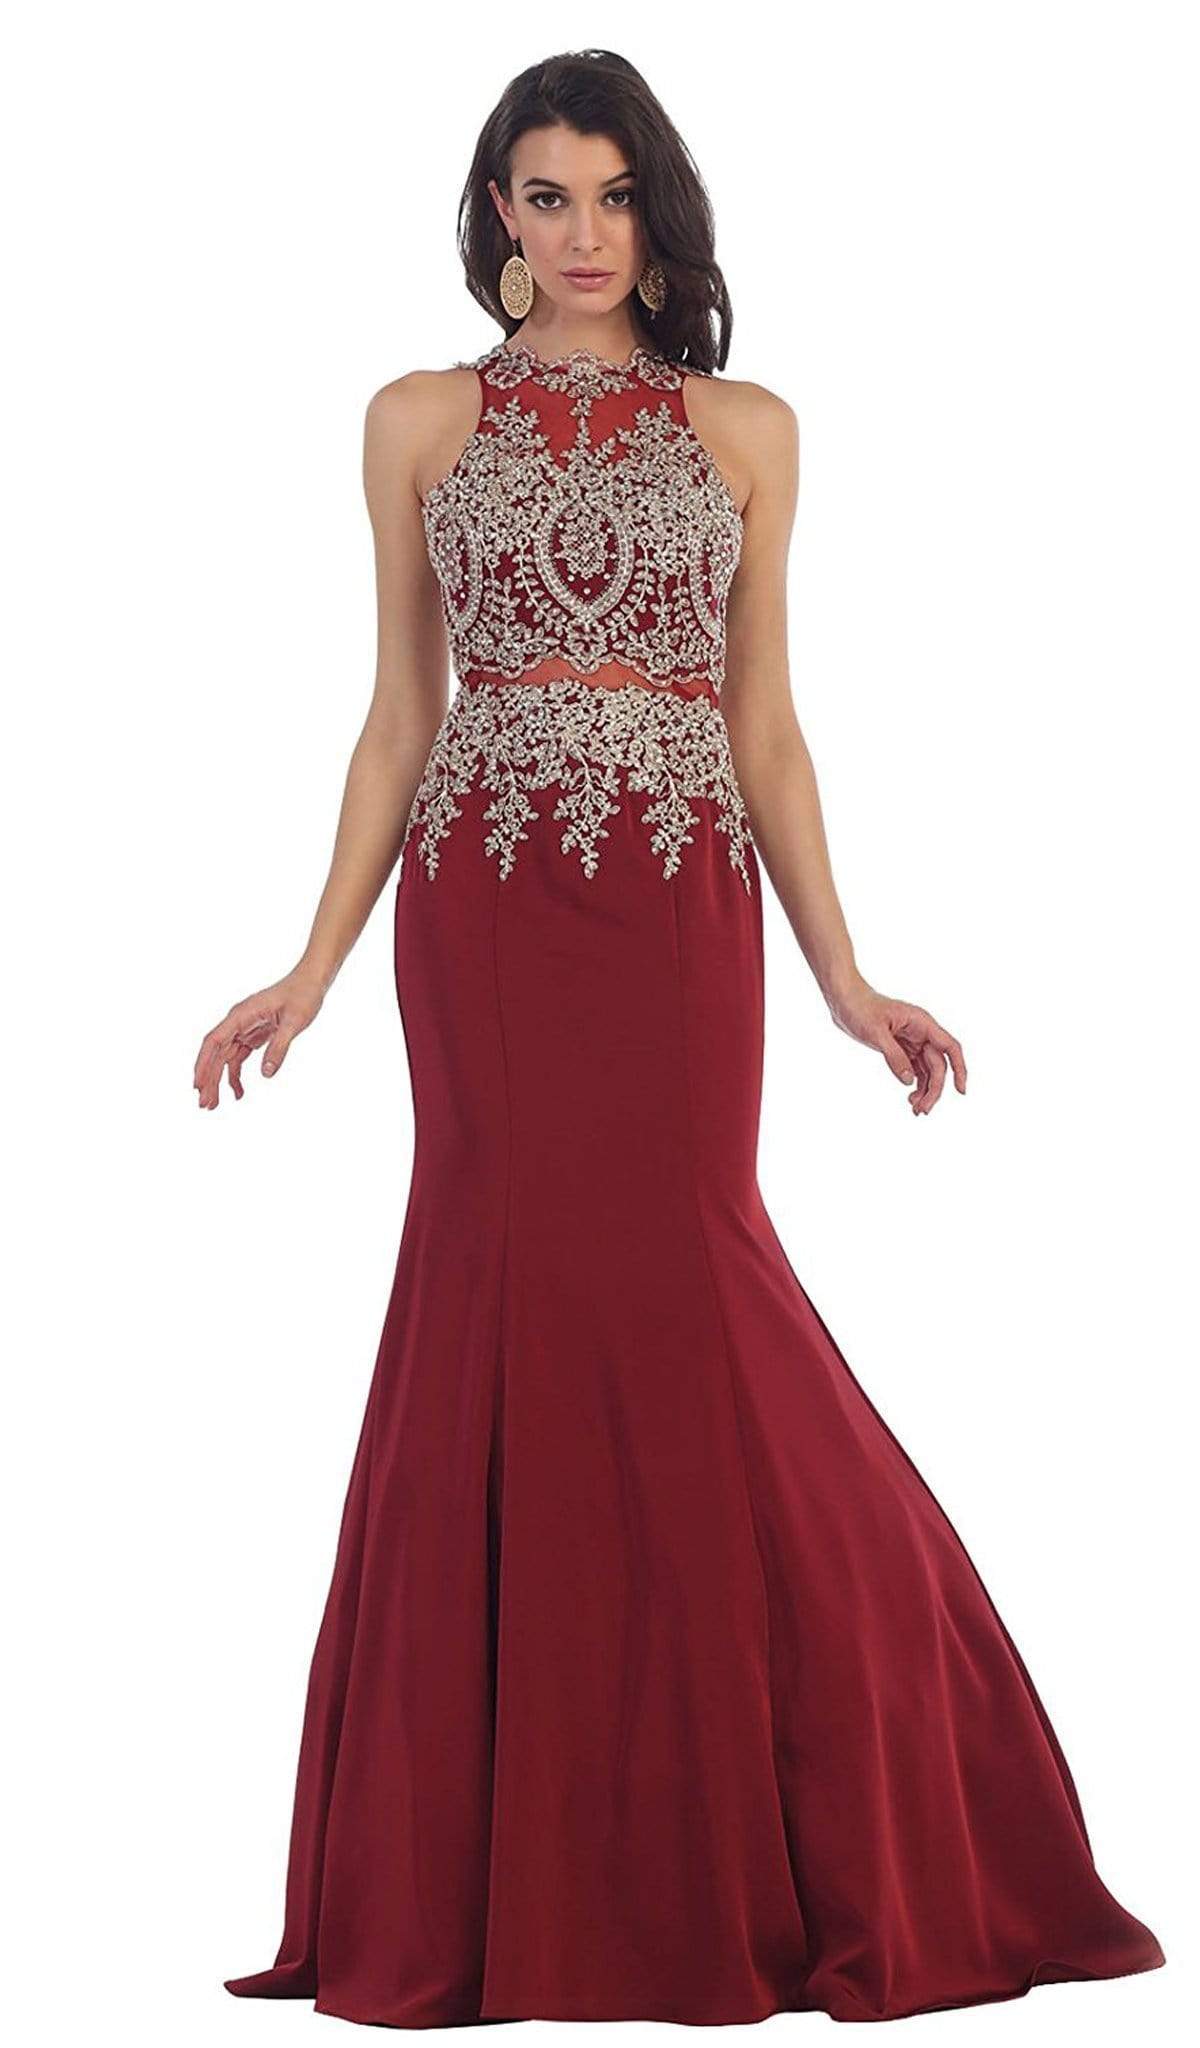 May Queen - Gilt Embroidered Illusion Trumpet Prom Gown